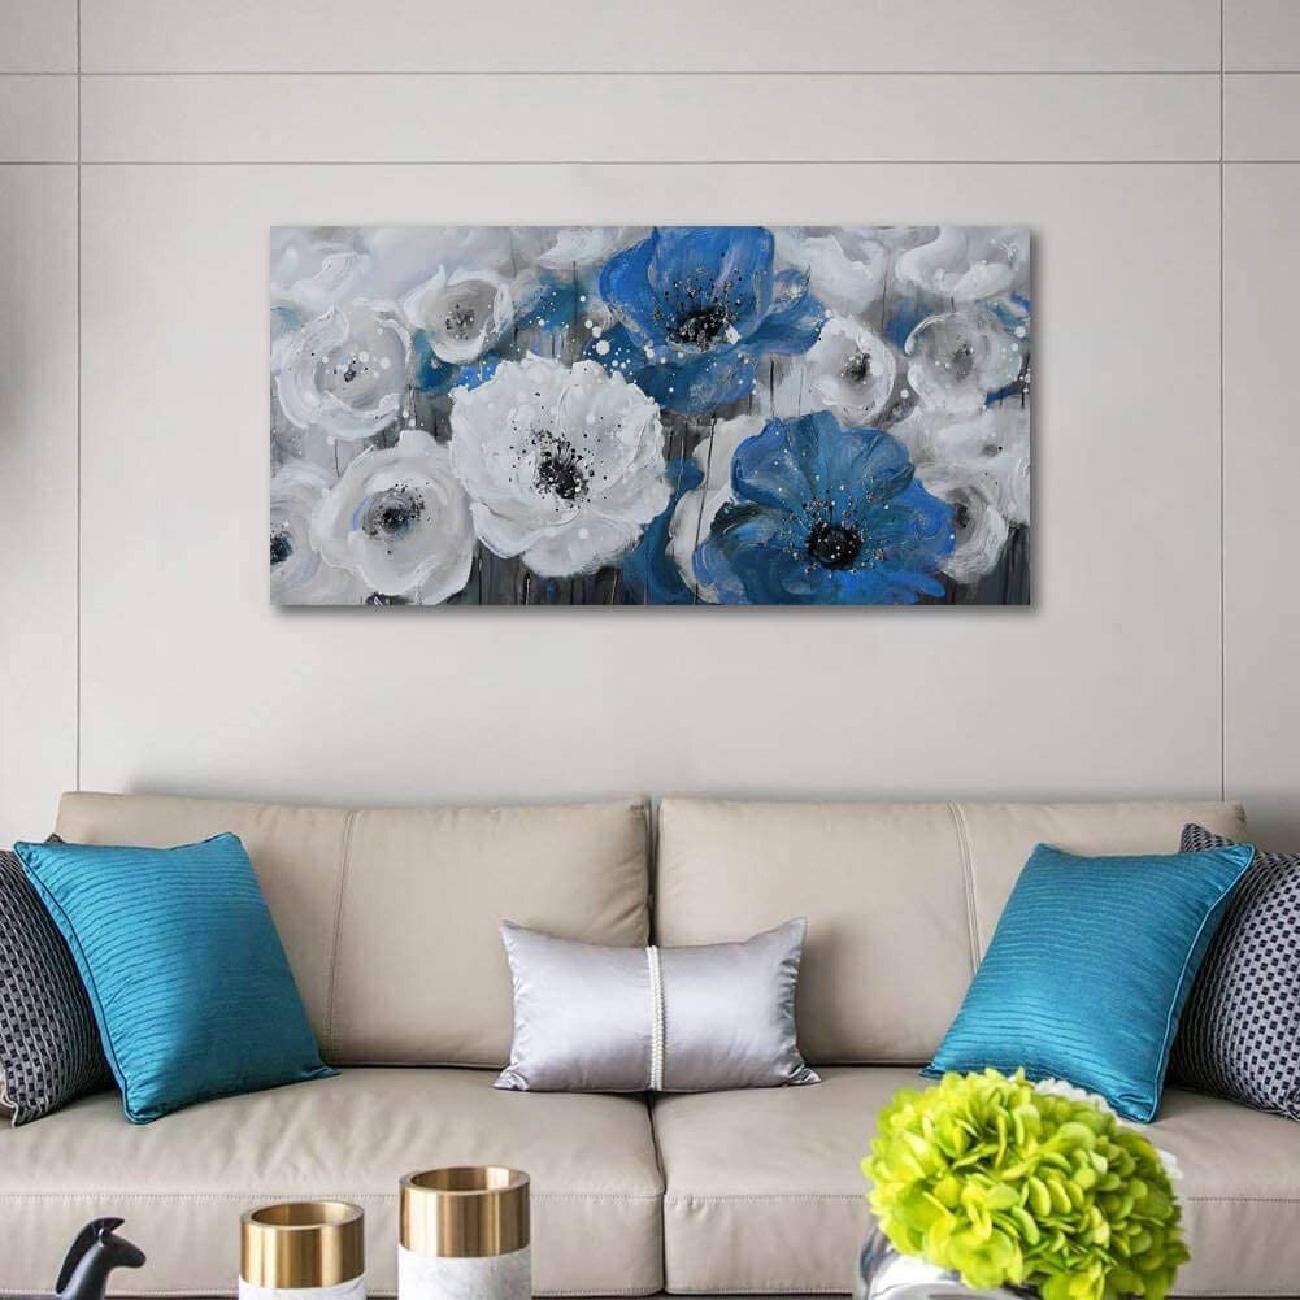 Unframed Oil Painting Canvas Poster Print Picture Art Wall Hanging Decor Gift